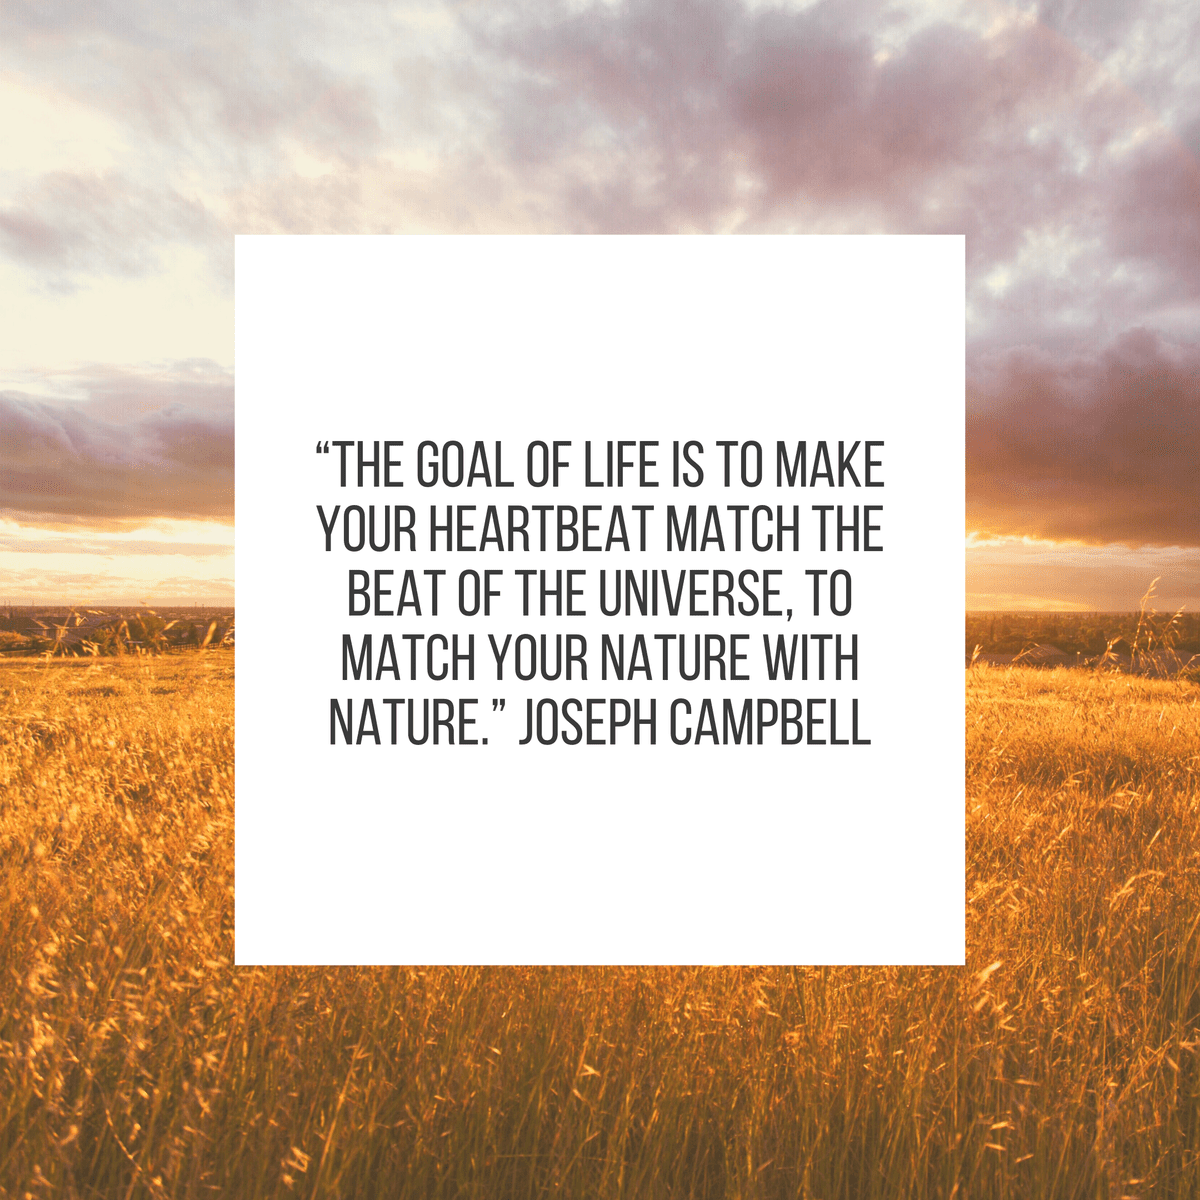 “The goal of life is to make your heartbeat match the beat of the universe, to match your nature with Nature.” Joseph Campbell